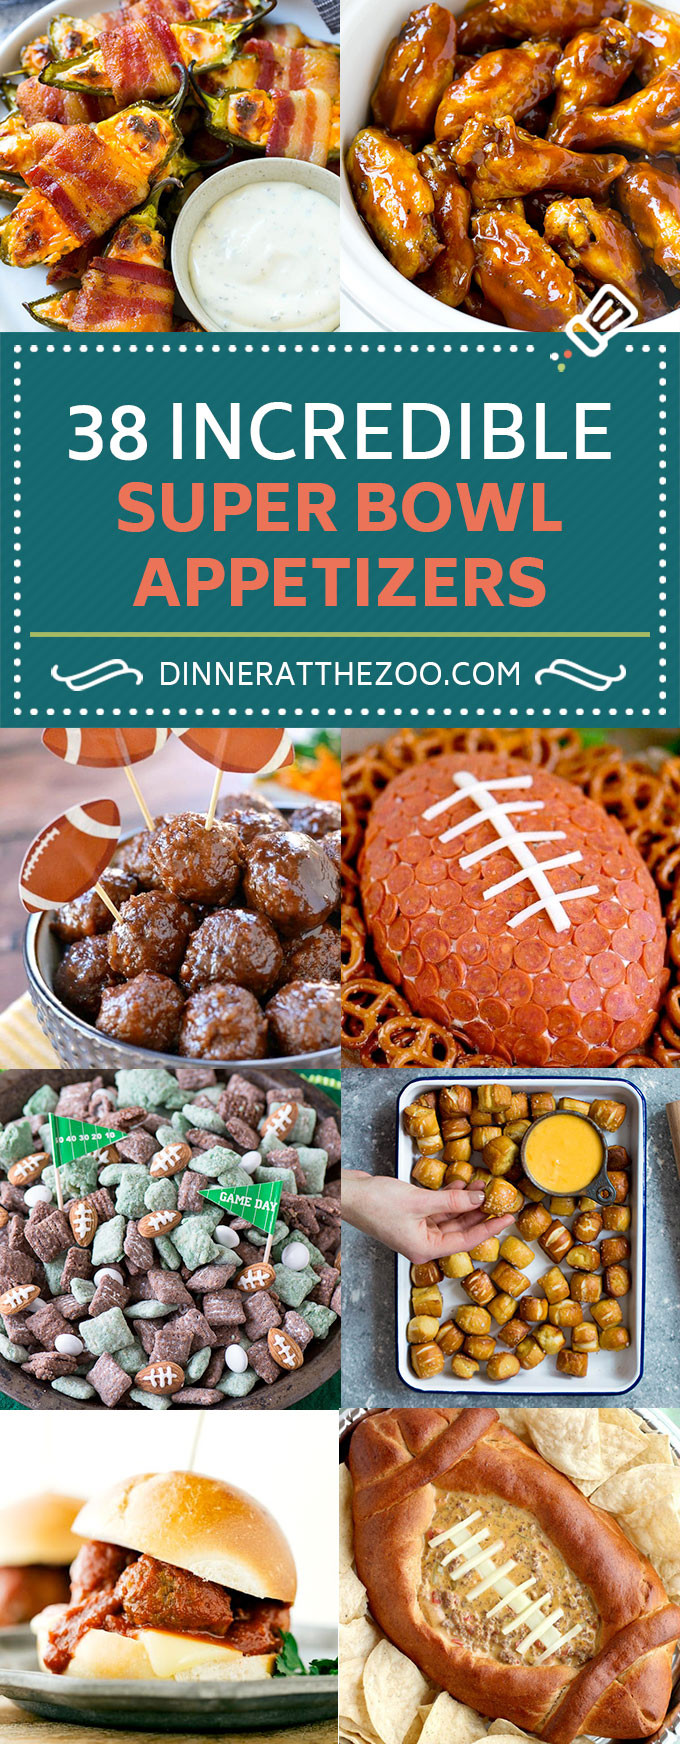 Easy Super Bowl Recipes
 45 Incredible Super Bowl Appetizer Recipes Dinner at the Zoo